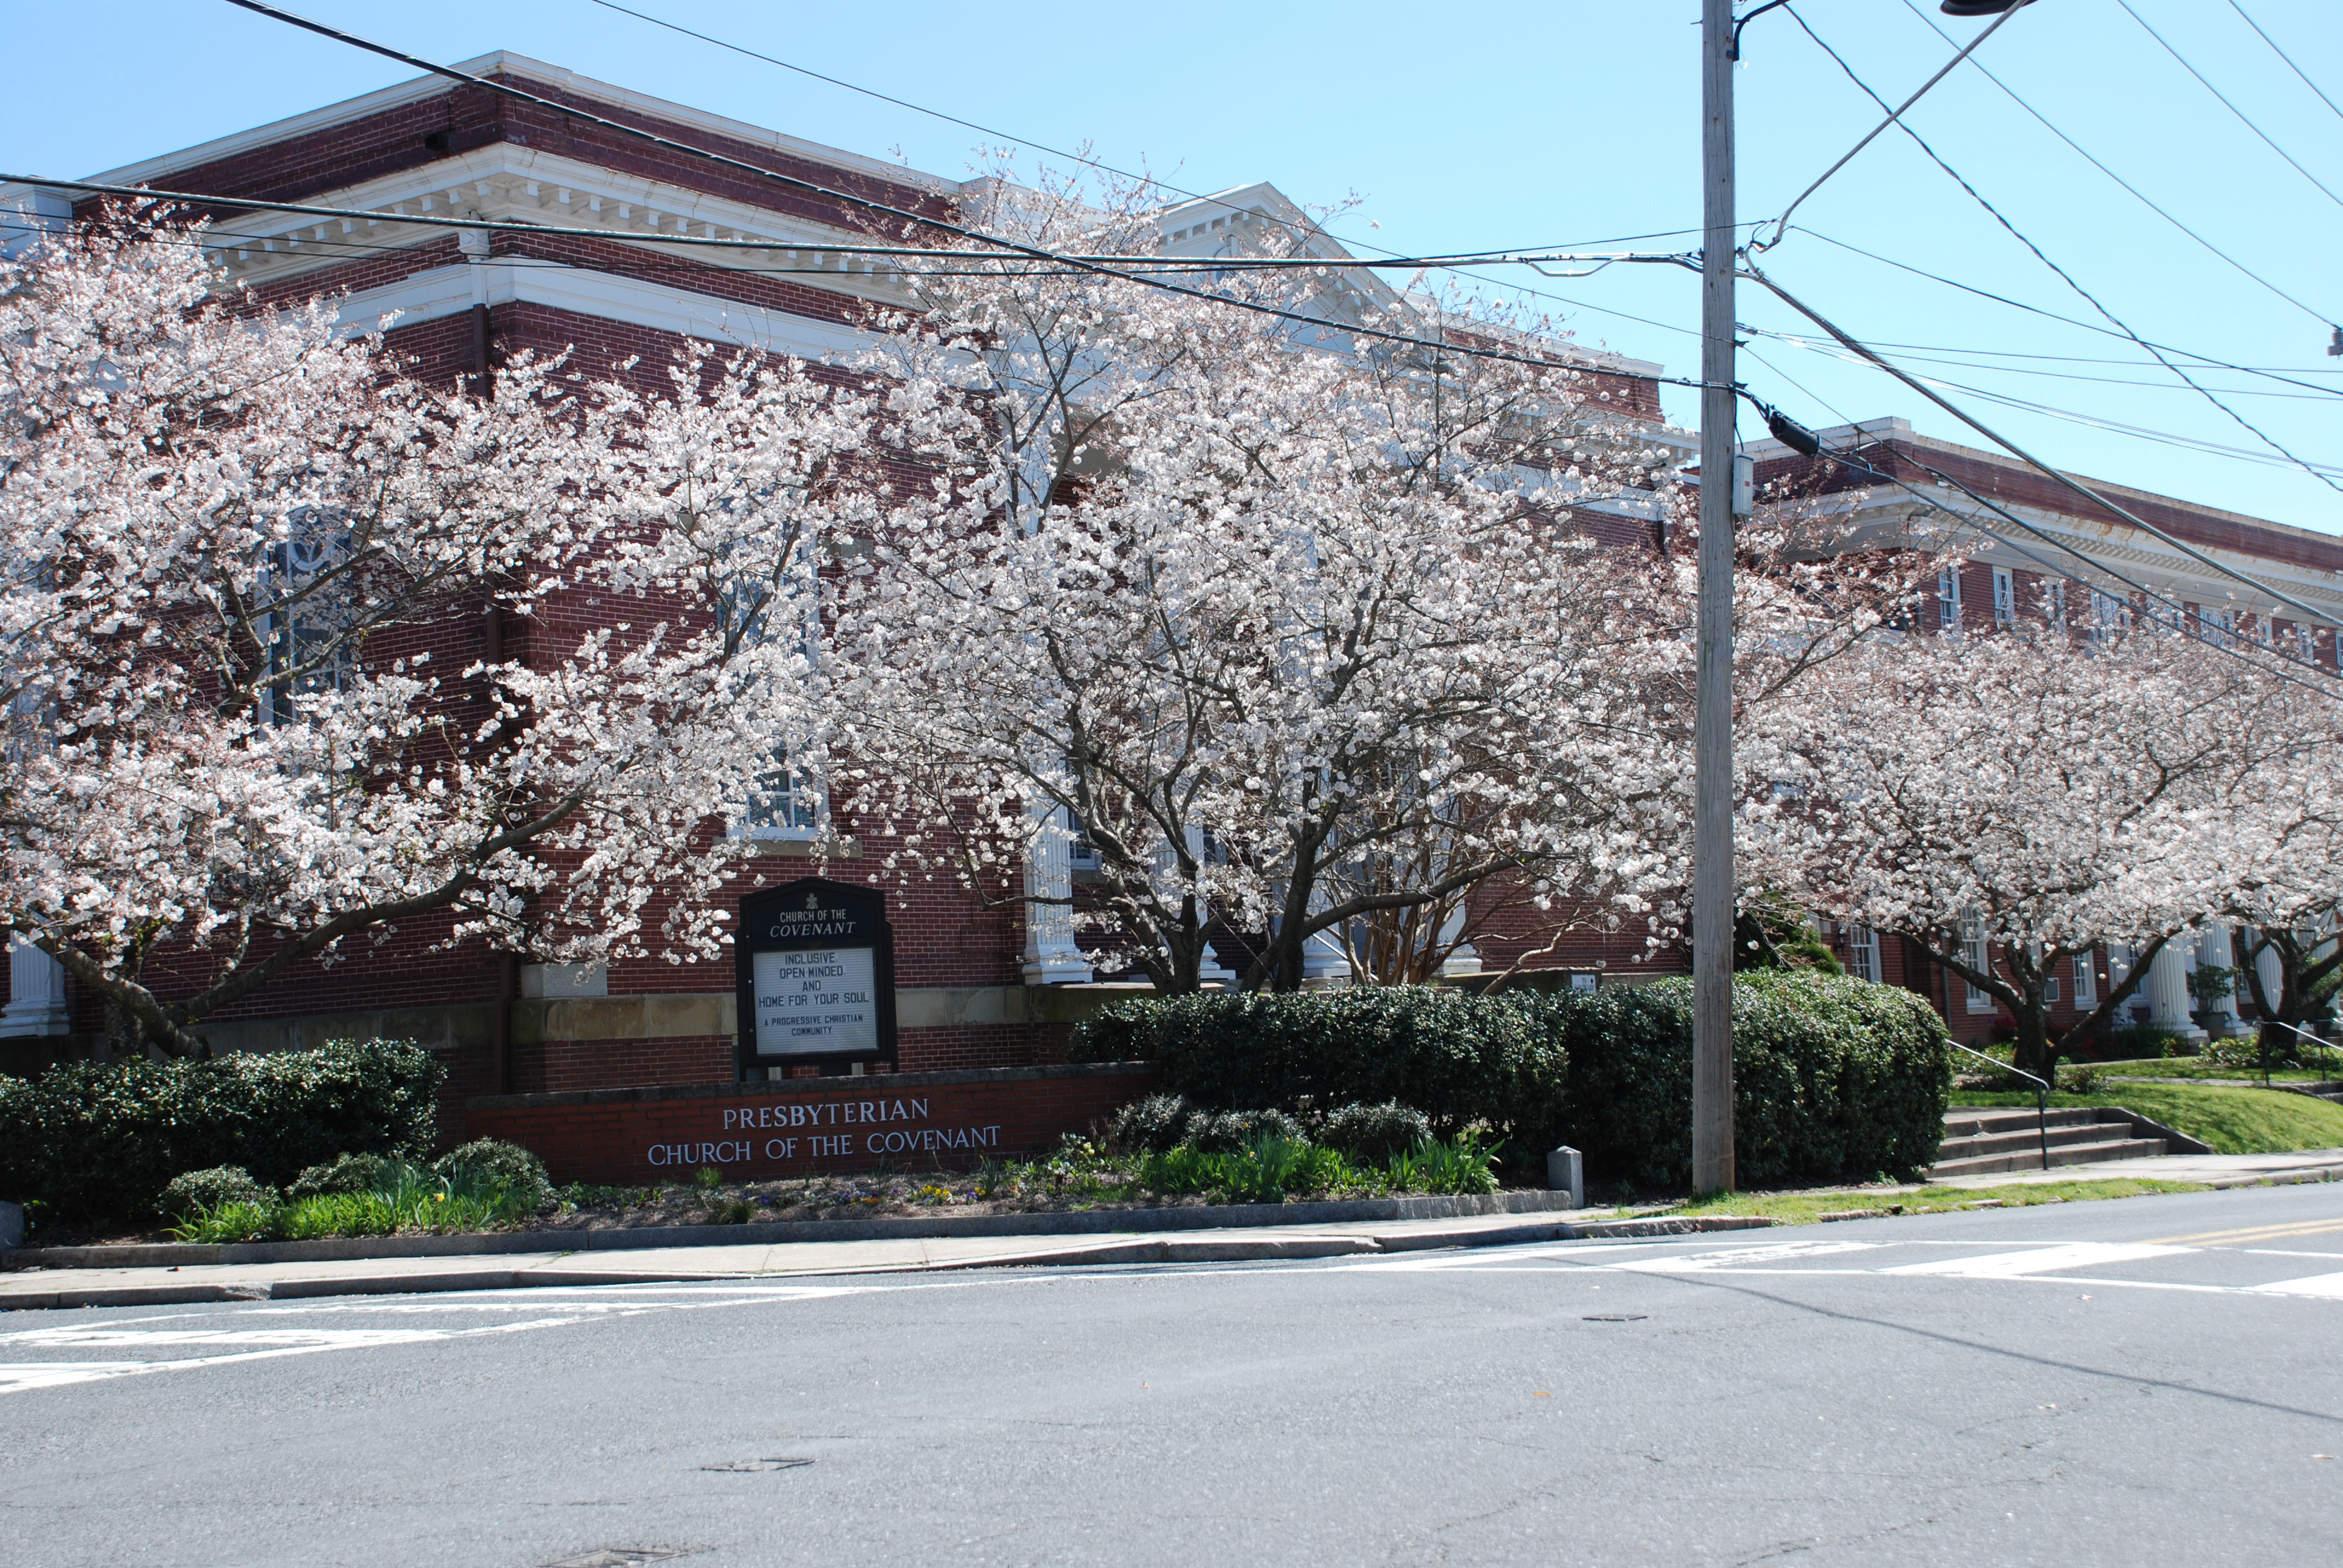 Presbyterian Church of the Covenant in the spring with cherry trees in blossom